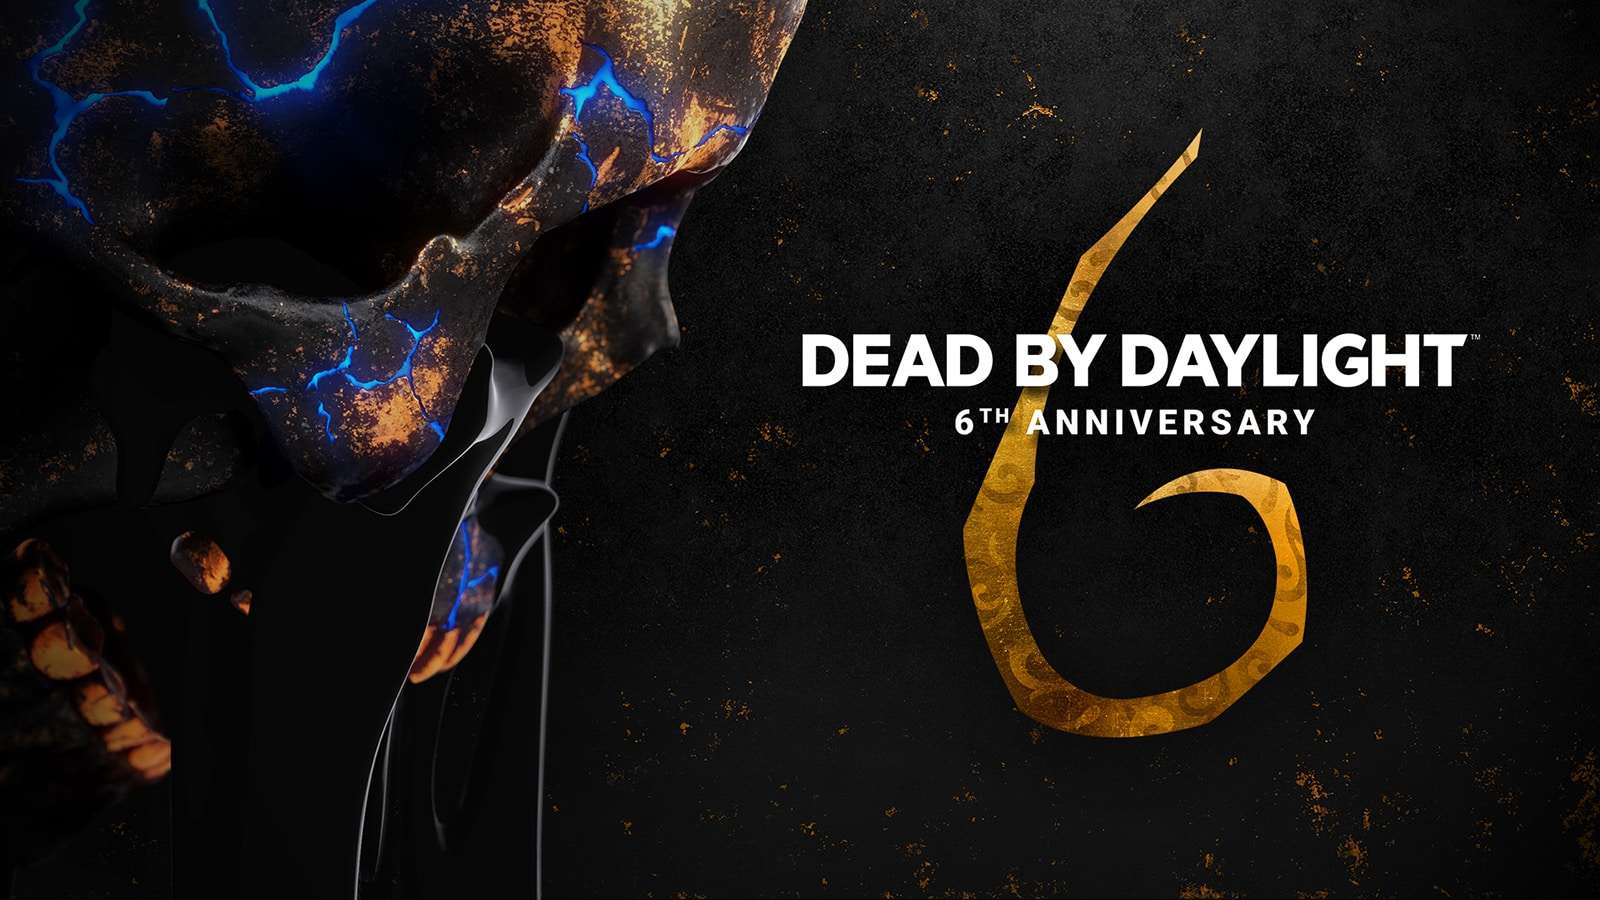 Art for the 6th Anniversary of Dead by Daylight